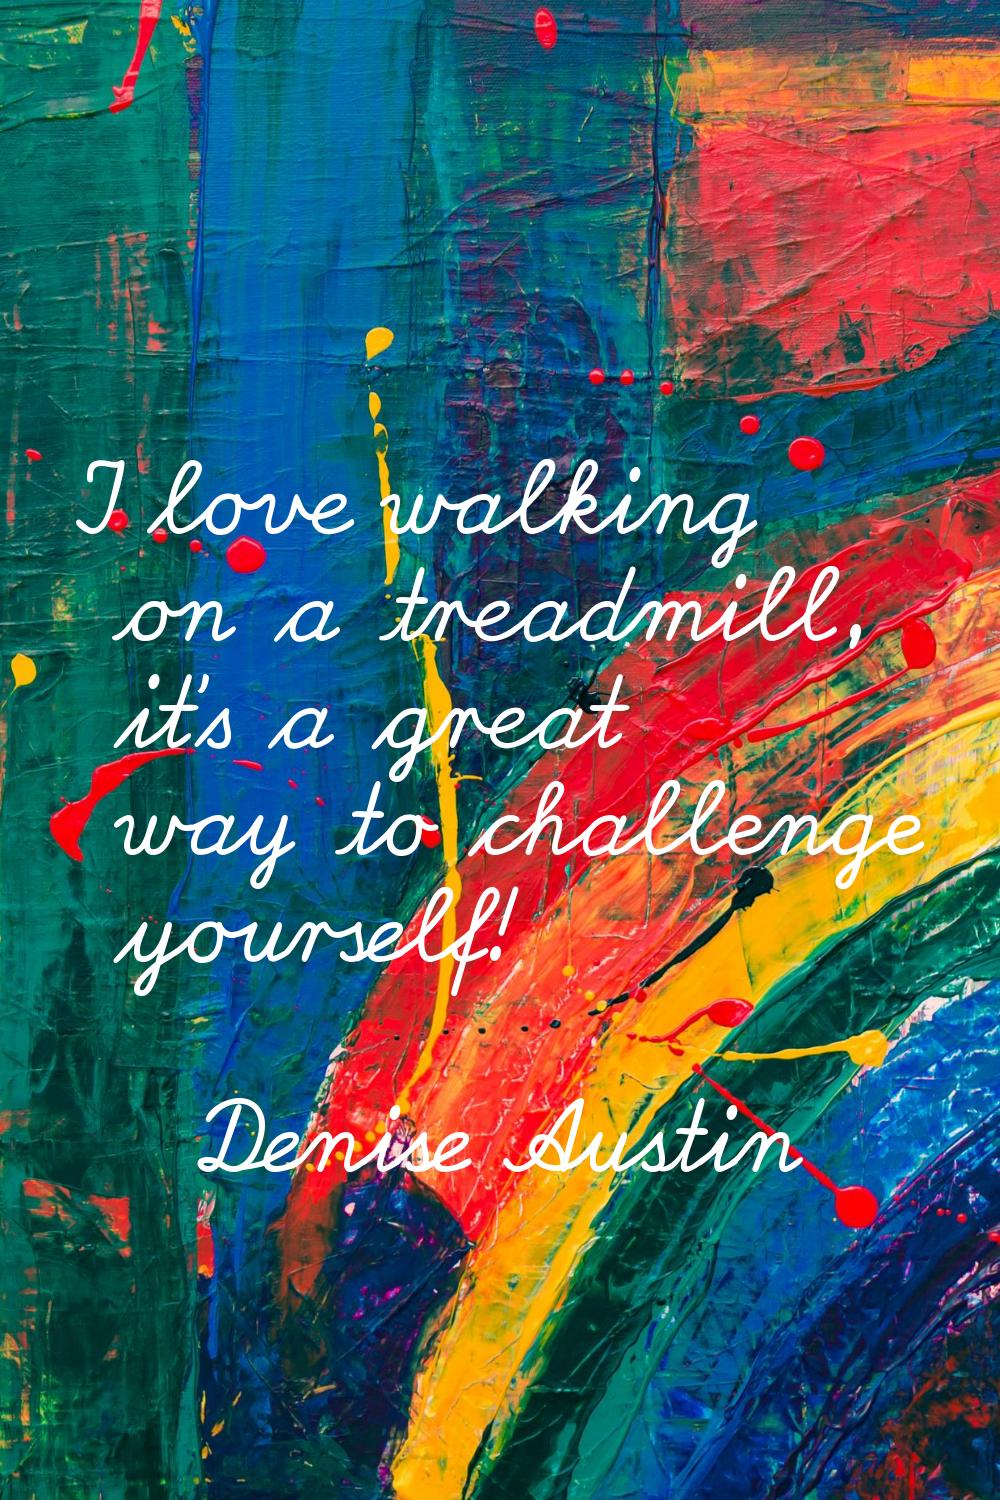 I love walking on a treadmill, it's a great way to challenge yourself!